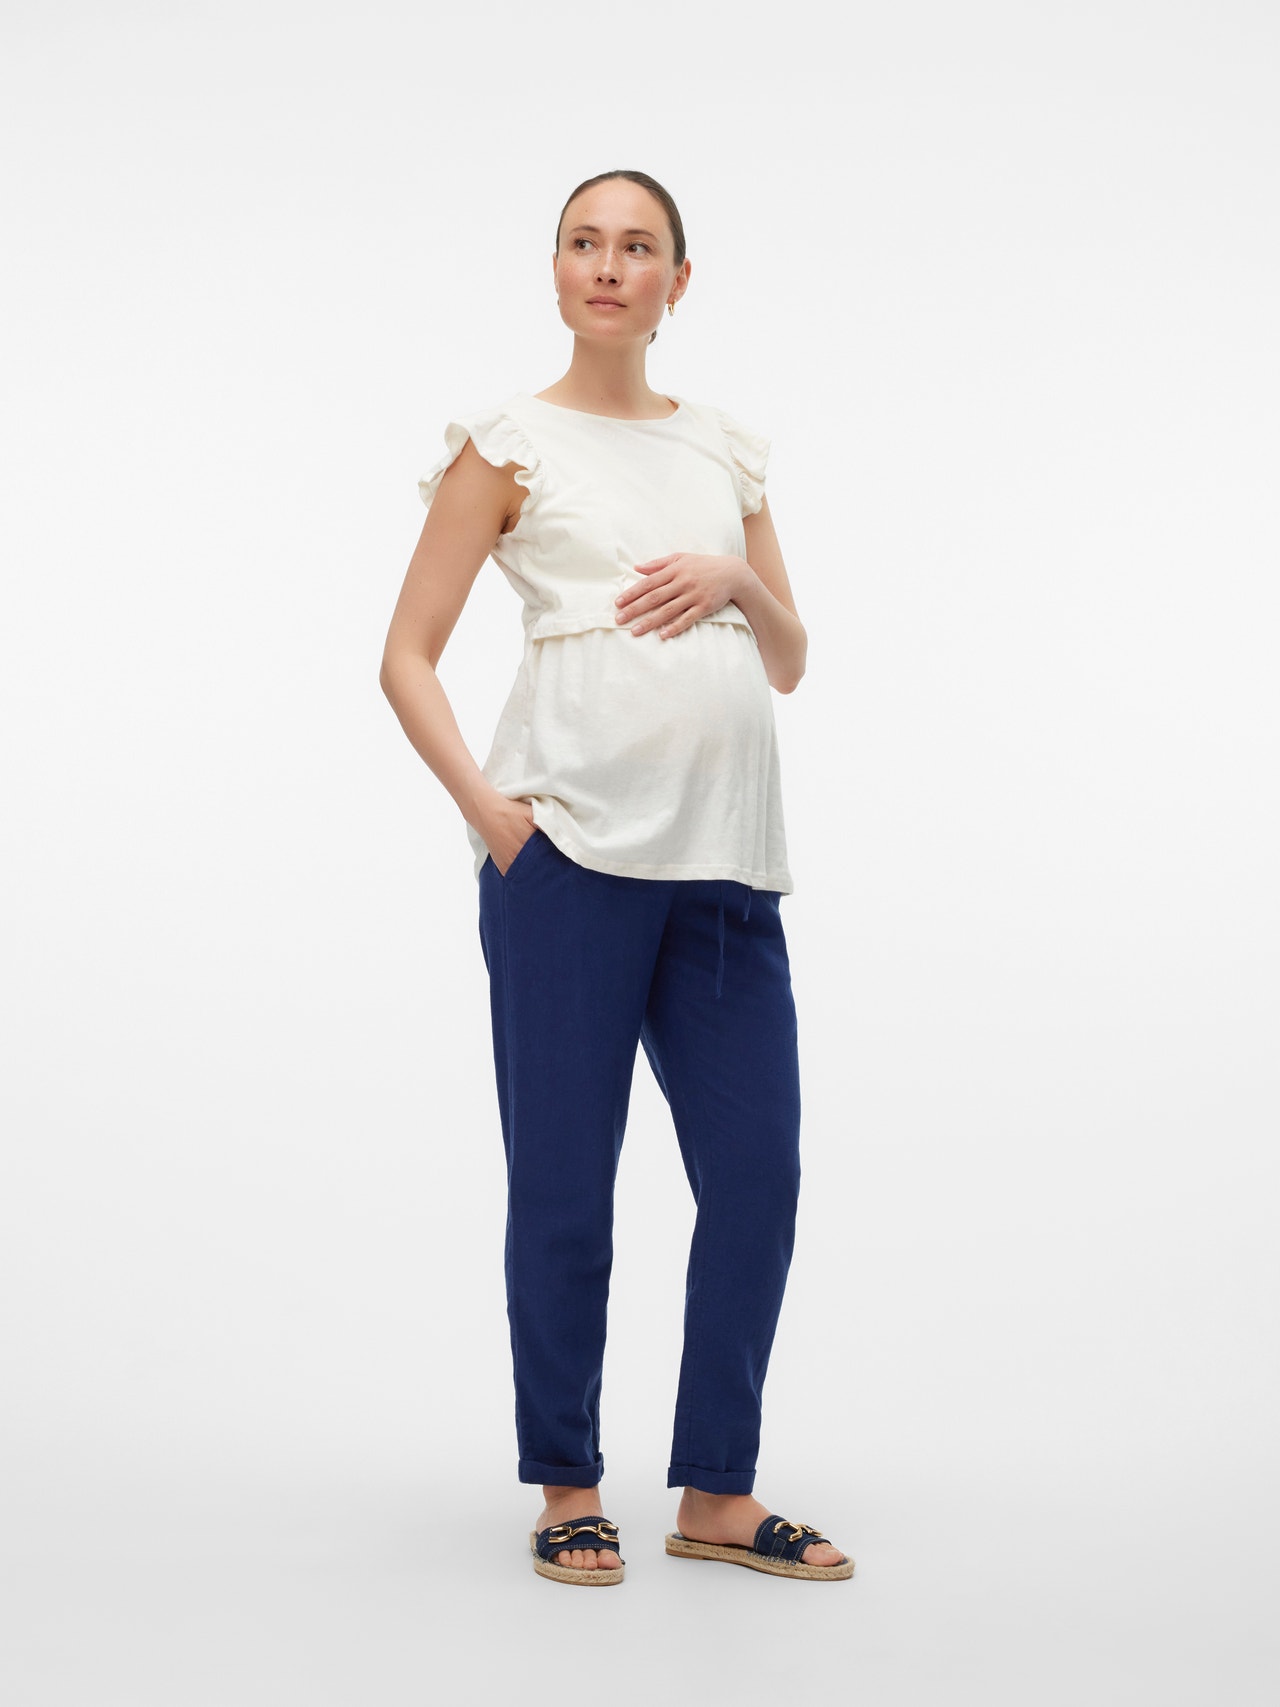 MAMA.LICIOUS Maternity-trousers -Naval Academy - 20015249